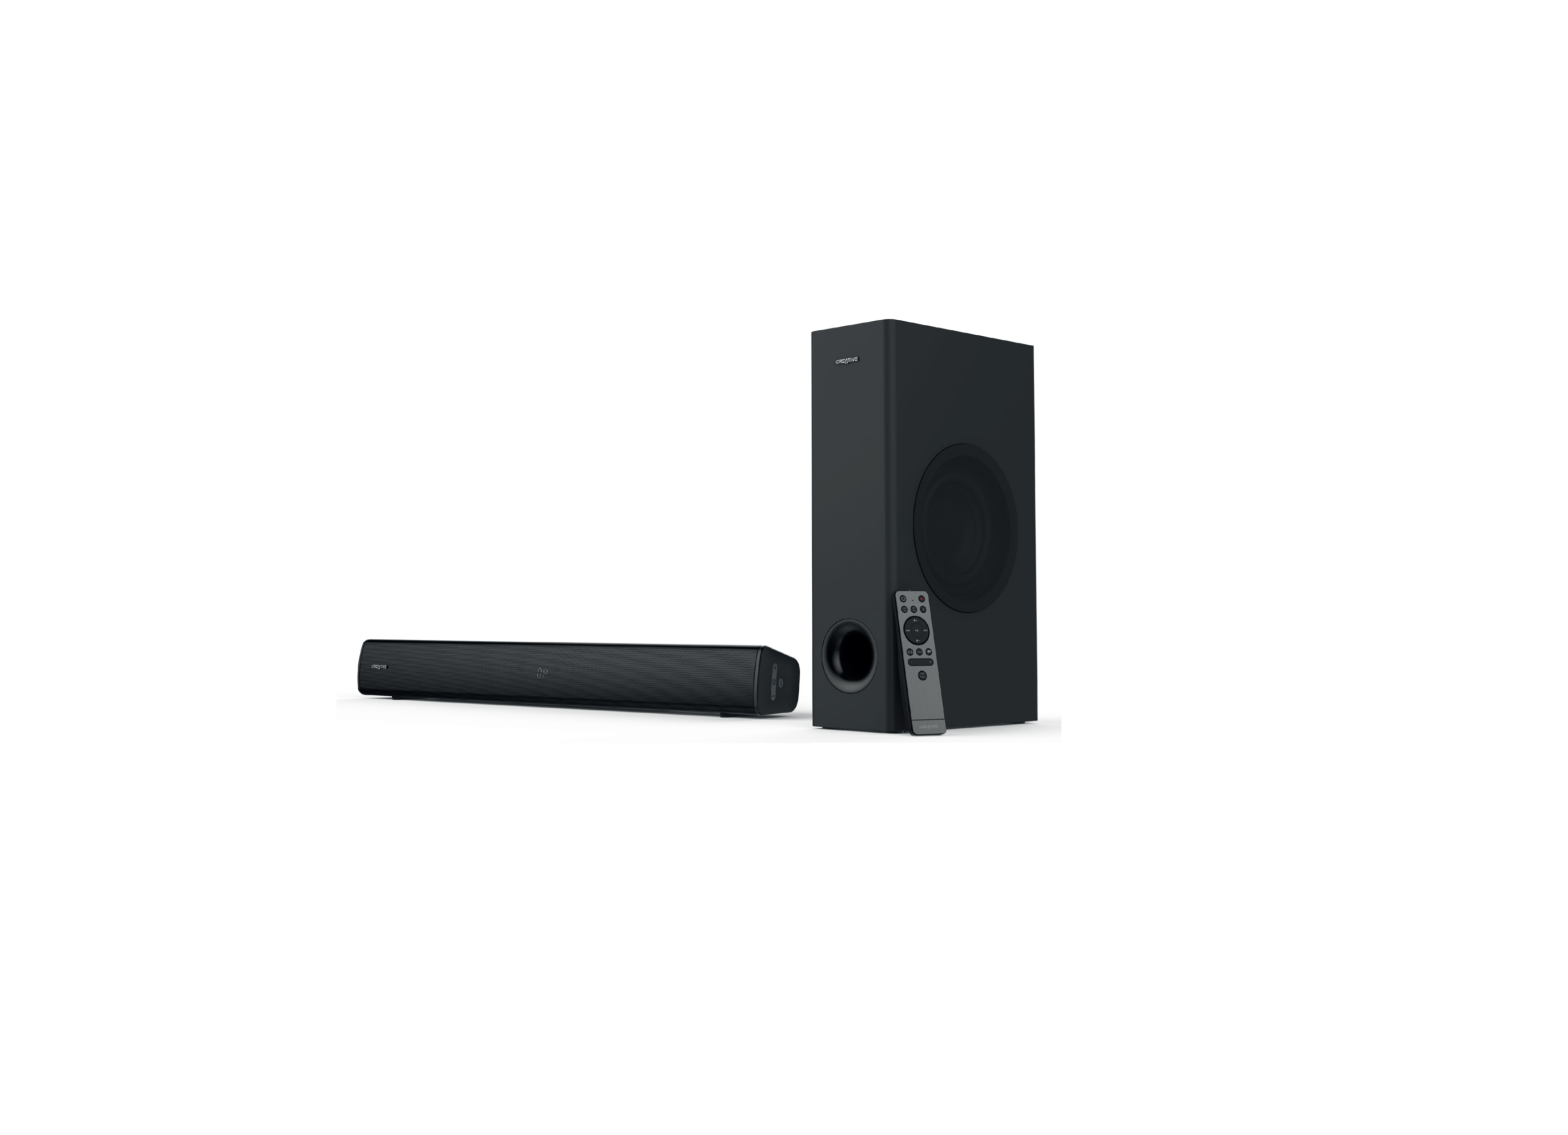 CREATIVE STAGE V2 MF8375 2.1 Soundbar with Clear Dialog and Surround Audio Processing User Guide